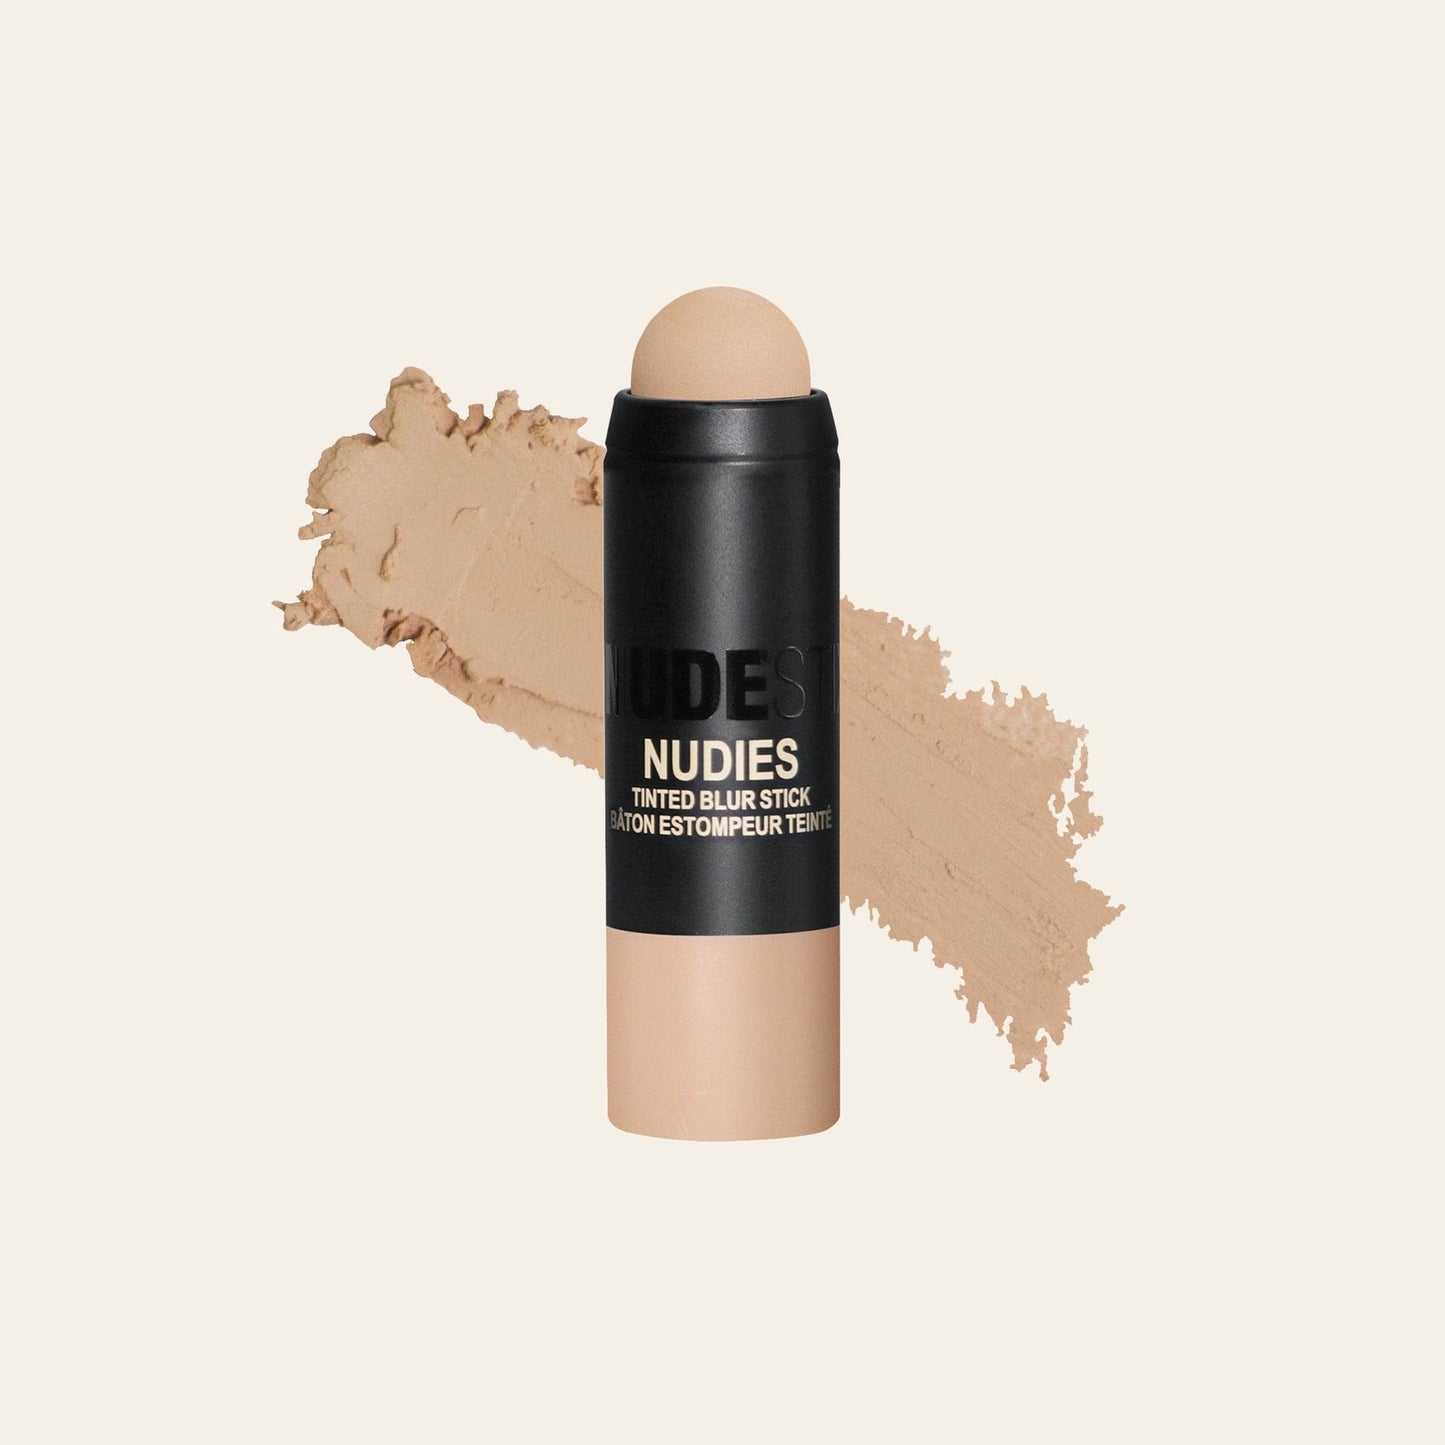 Tinted Blur Foundation Stick in shade Light 2 with texture swatch